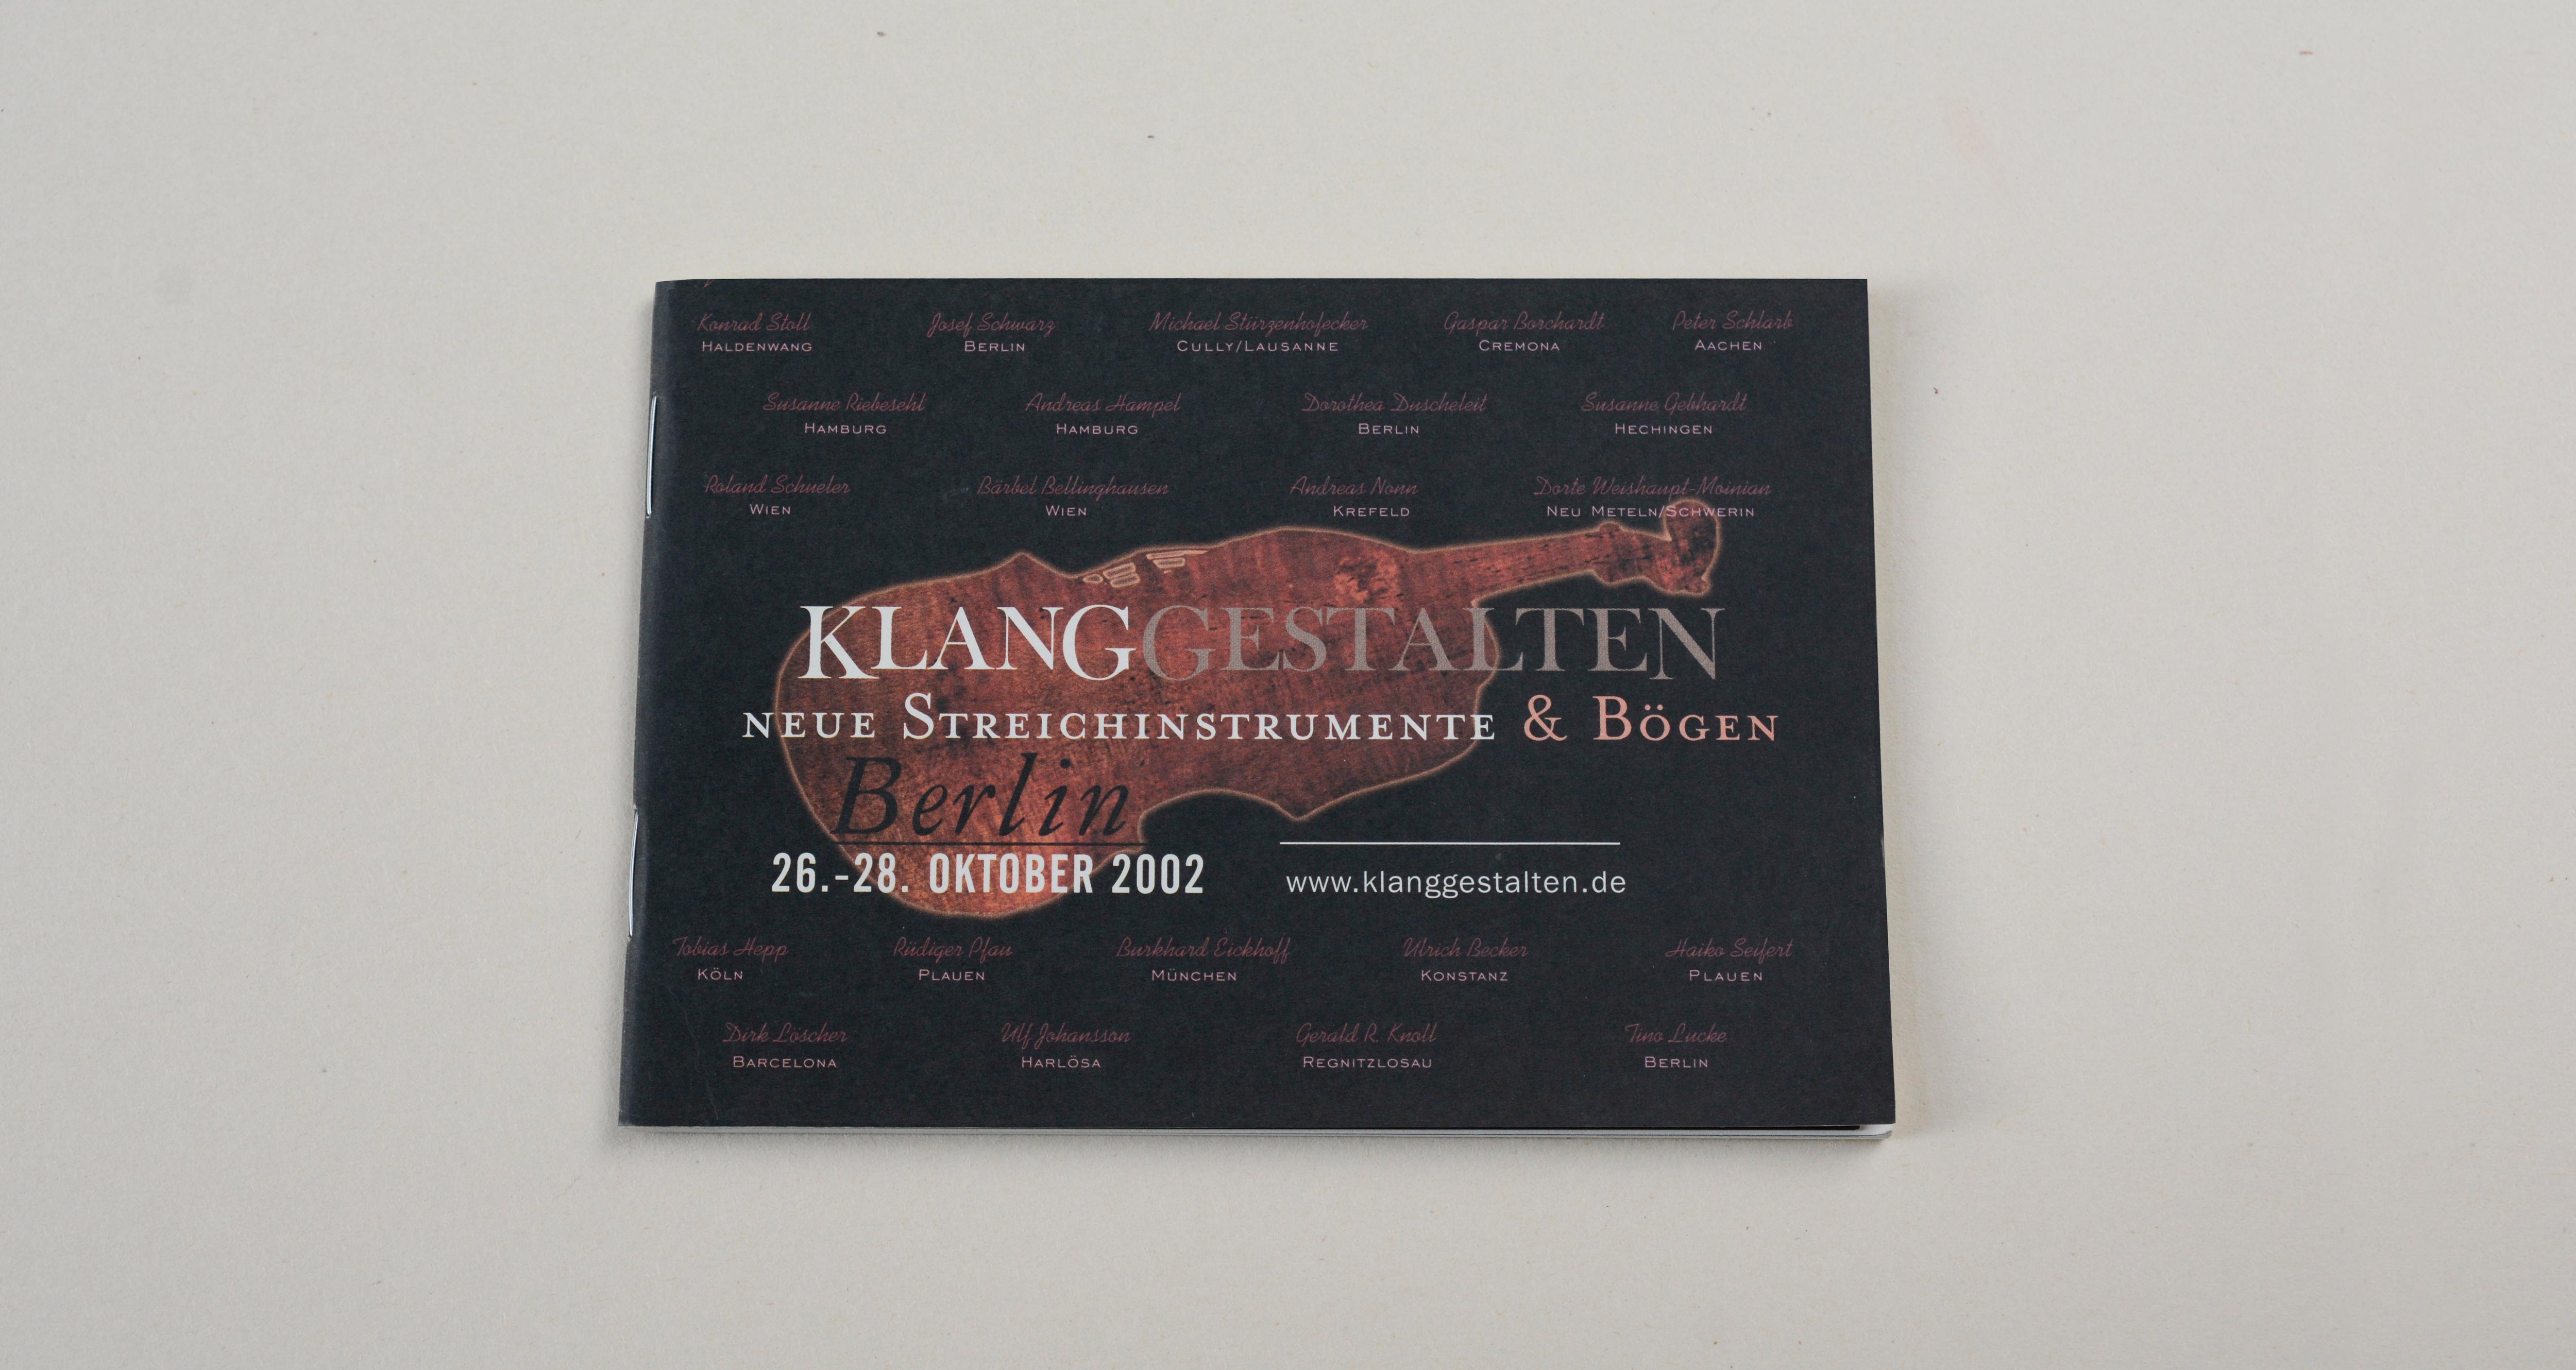 Cover catalogue landscape format. Black background. Large silhouette of violin in the middle. Large logo/title and line of text overlayed. Several signatures overlayed on entire cover.